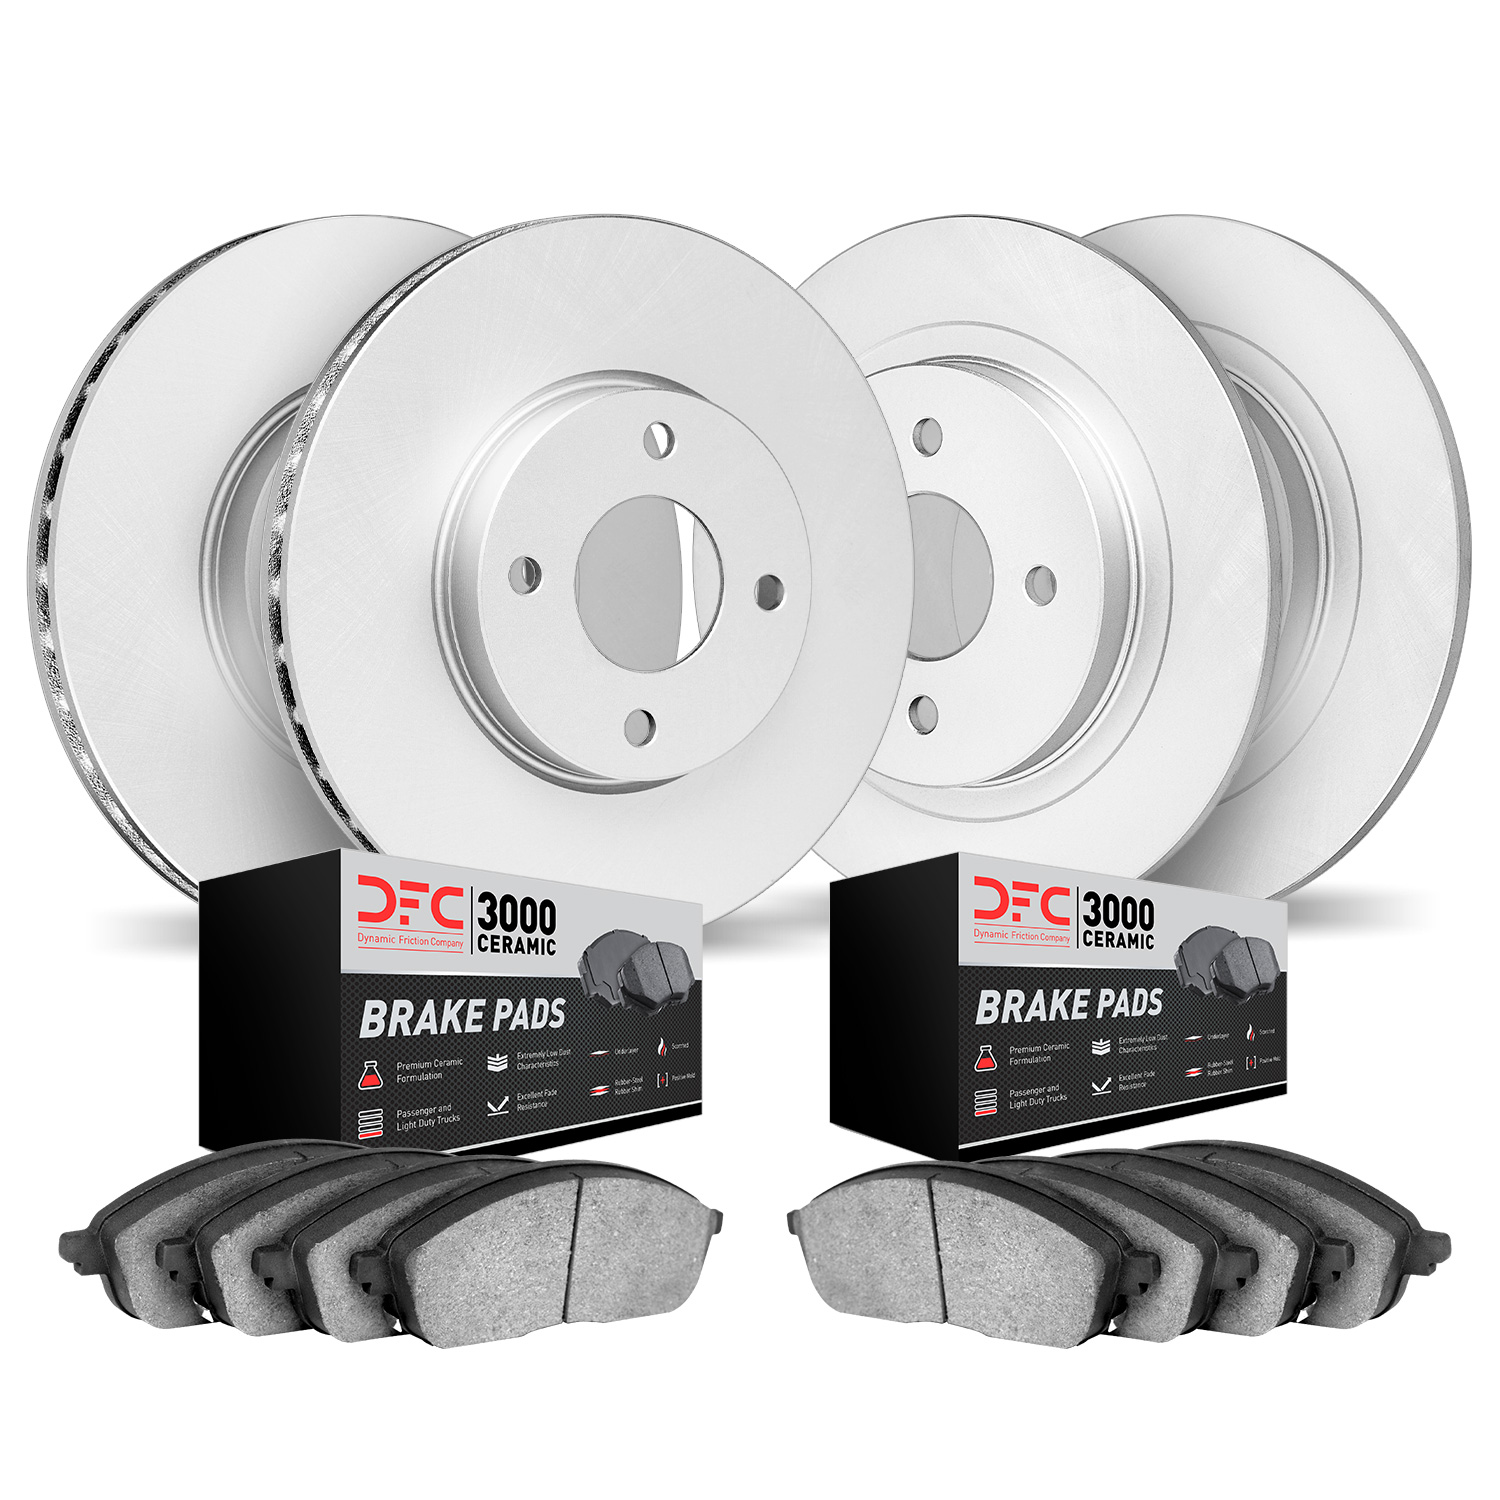 4304-59014 Geospec Brake Rotors with 3000-Series Ceramic Brake Pads Kit, 1993-2001 Acura/Honda, Position: Front and Rear